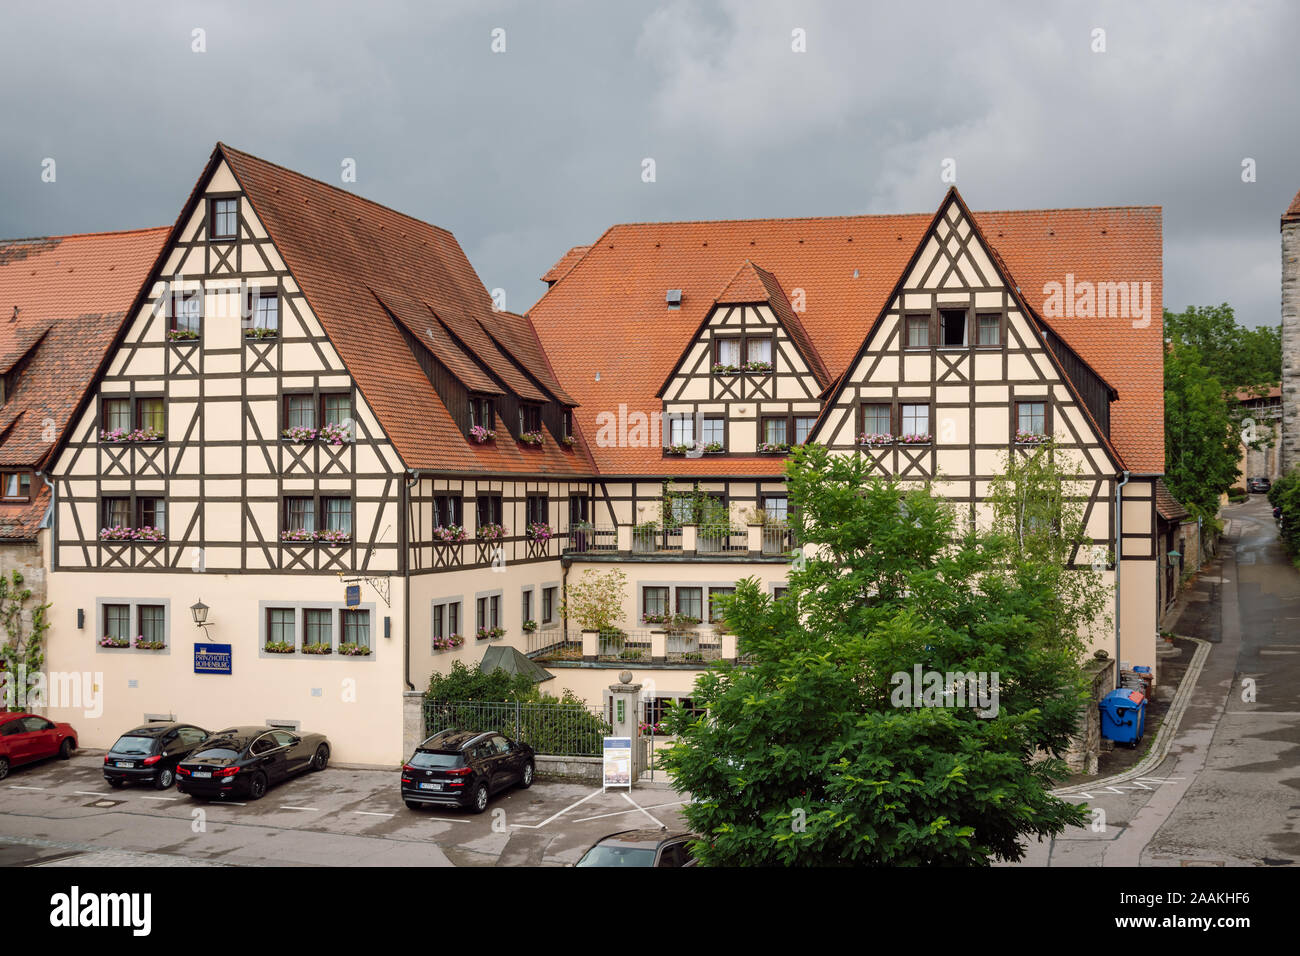 View of the Prinzhotel Rothenburg, from the city wall. Traditional half- timbered buildings with tile roofs in Rothenburg ob der Tauber, Germany. Stock Photo